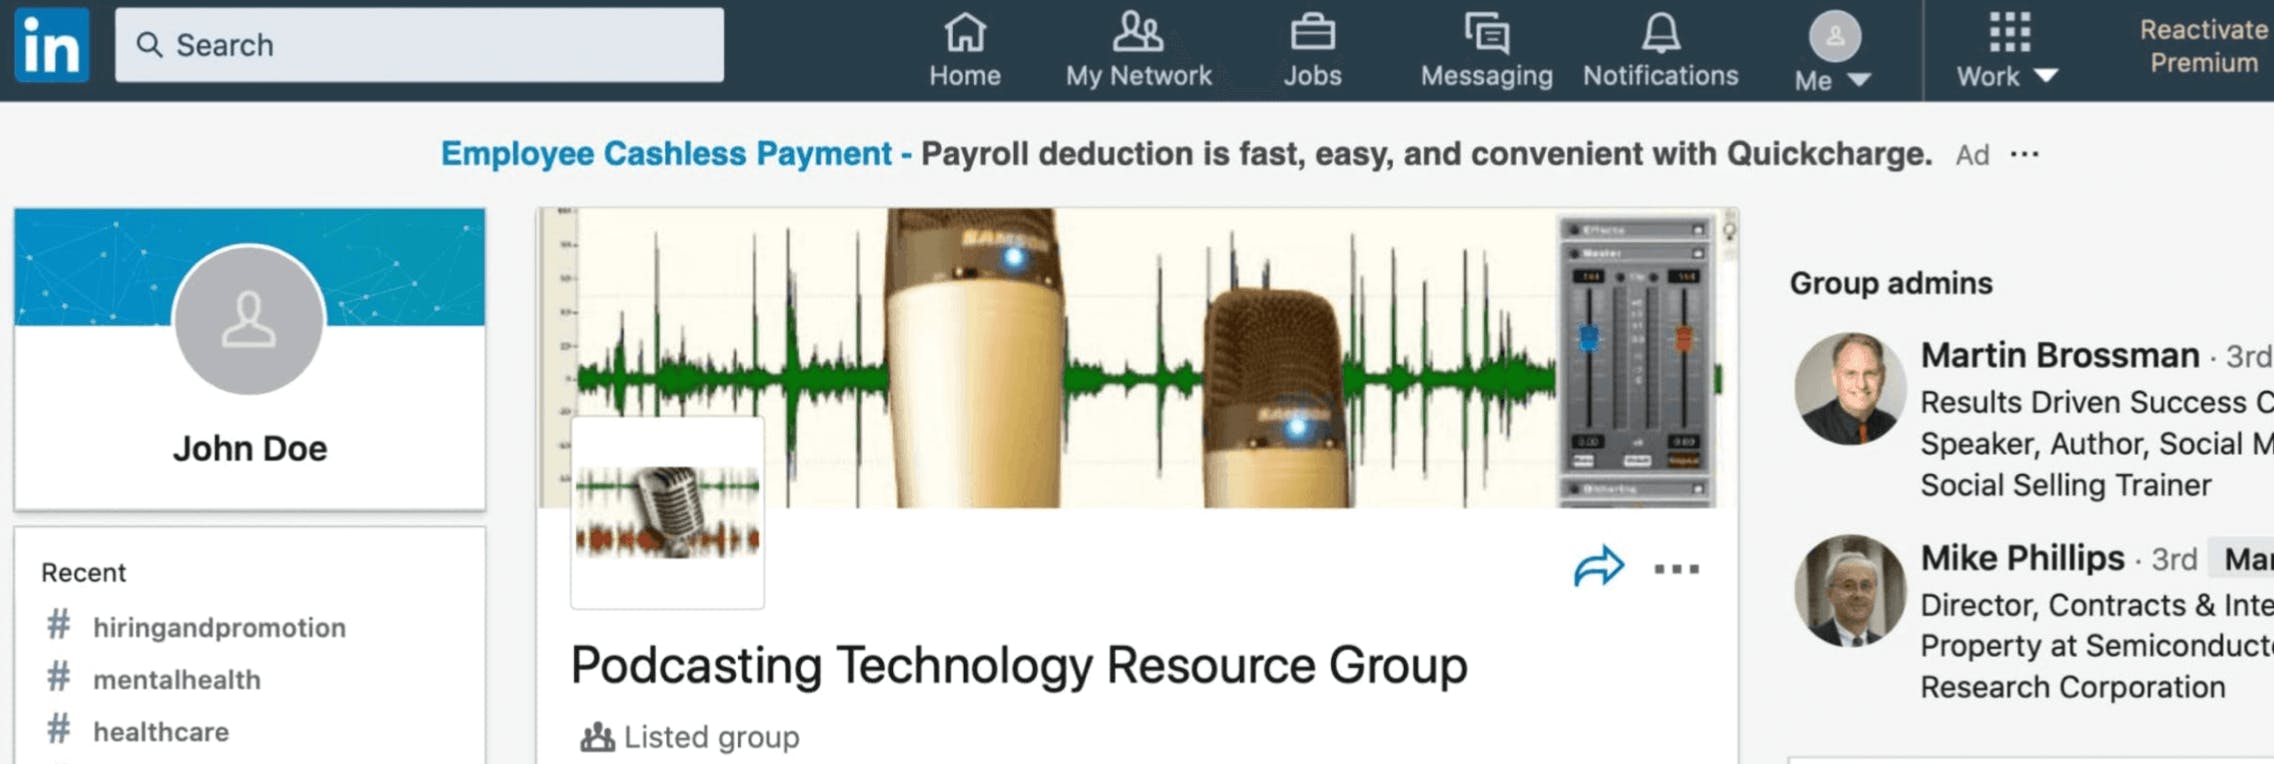 Podcasting Technology Resource Group LinkedIn page